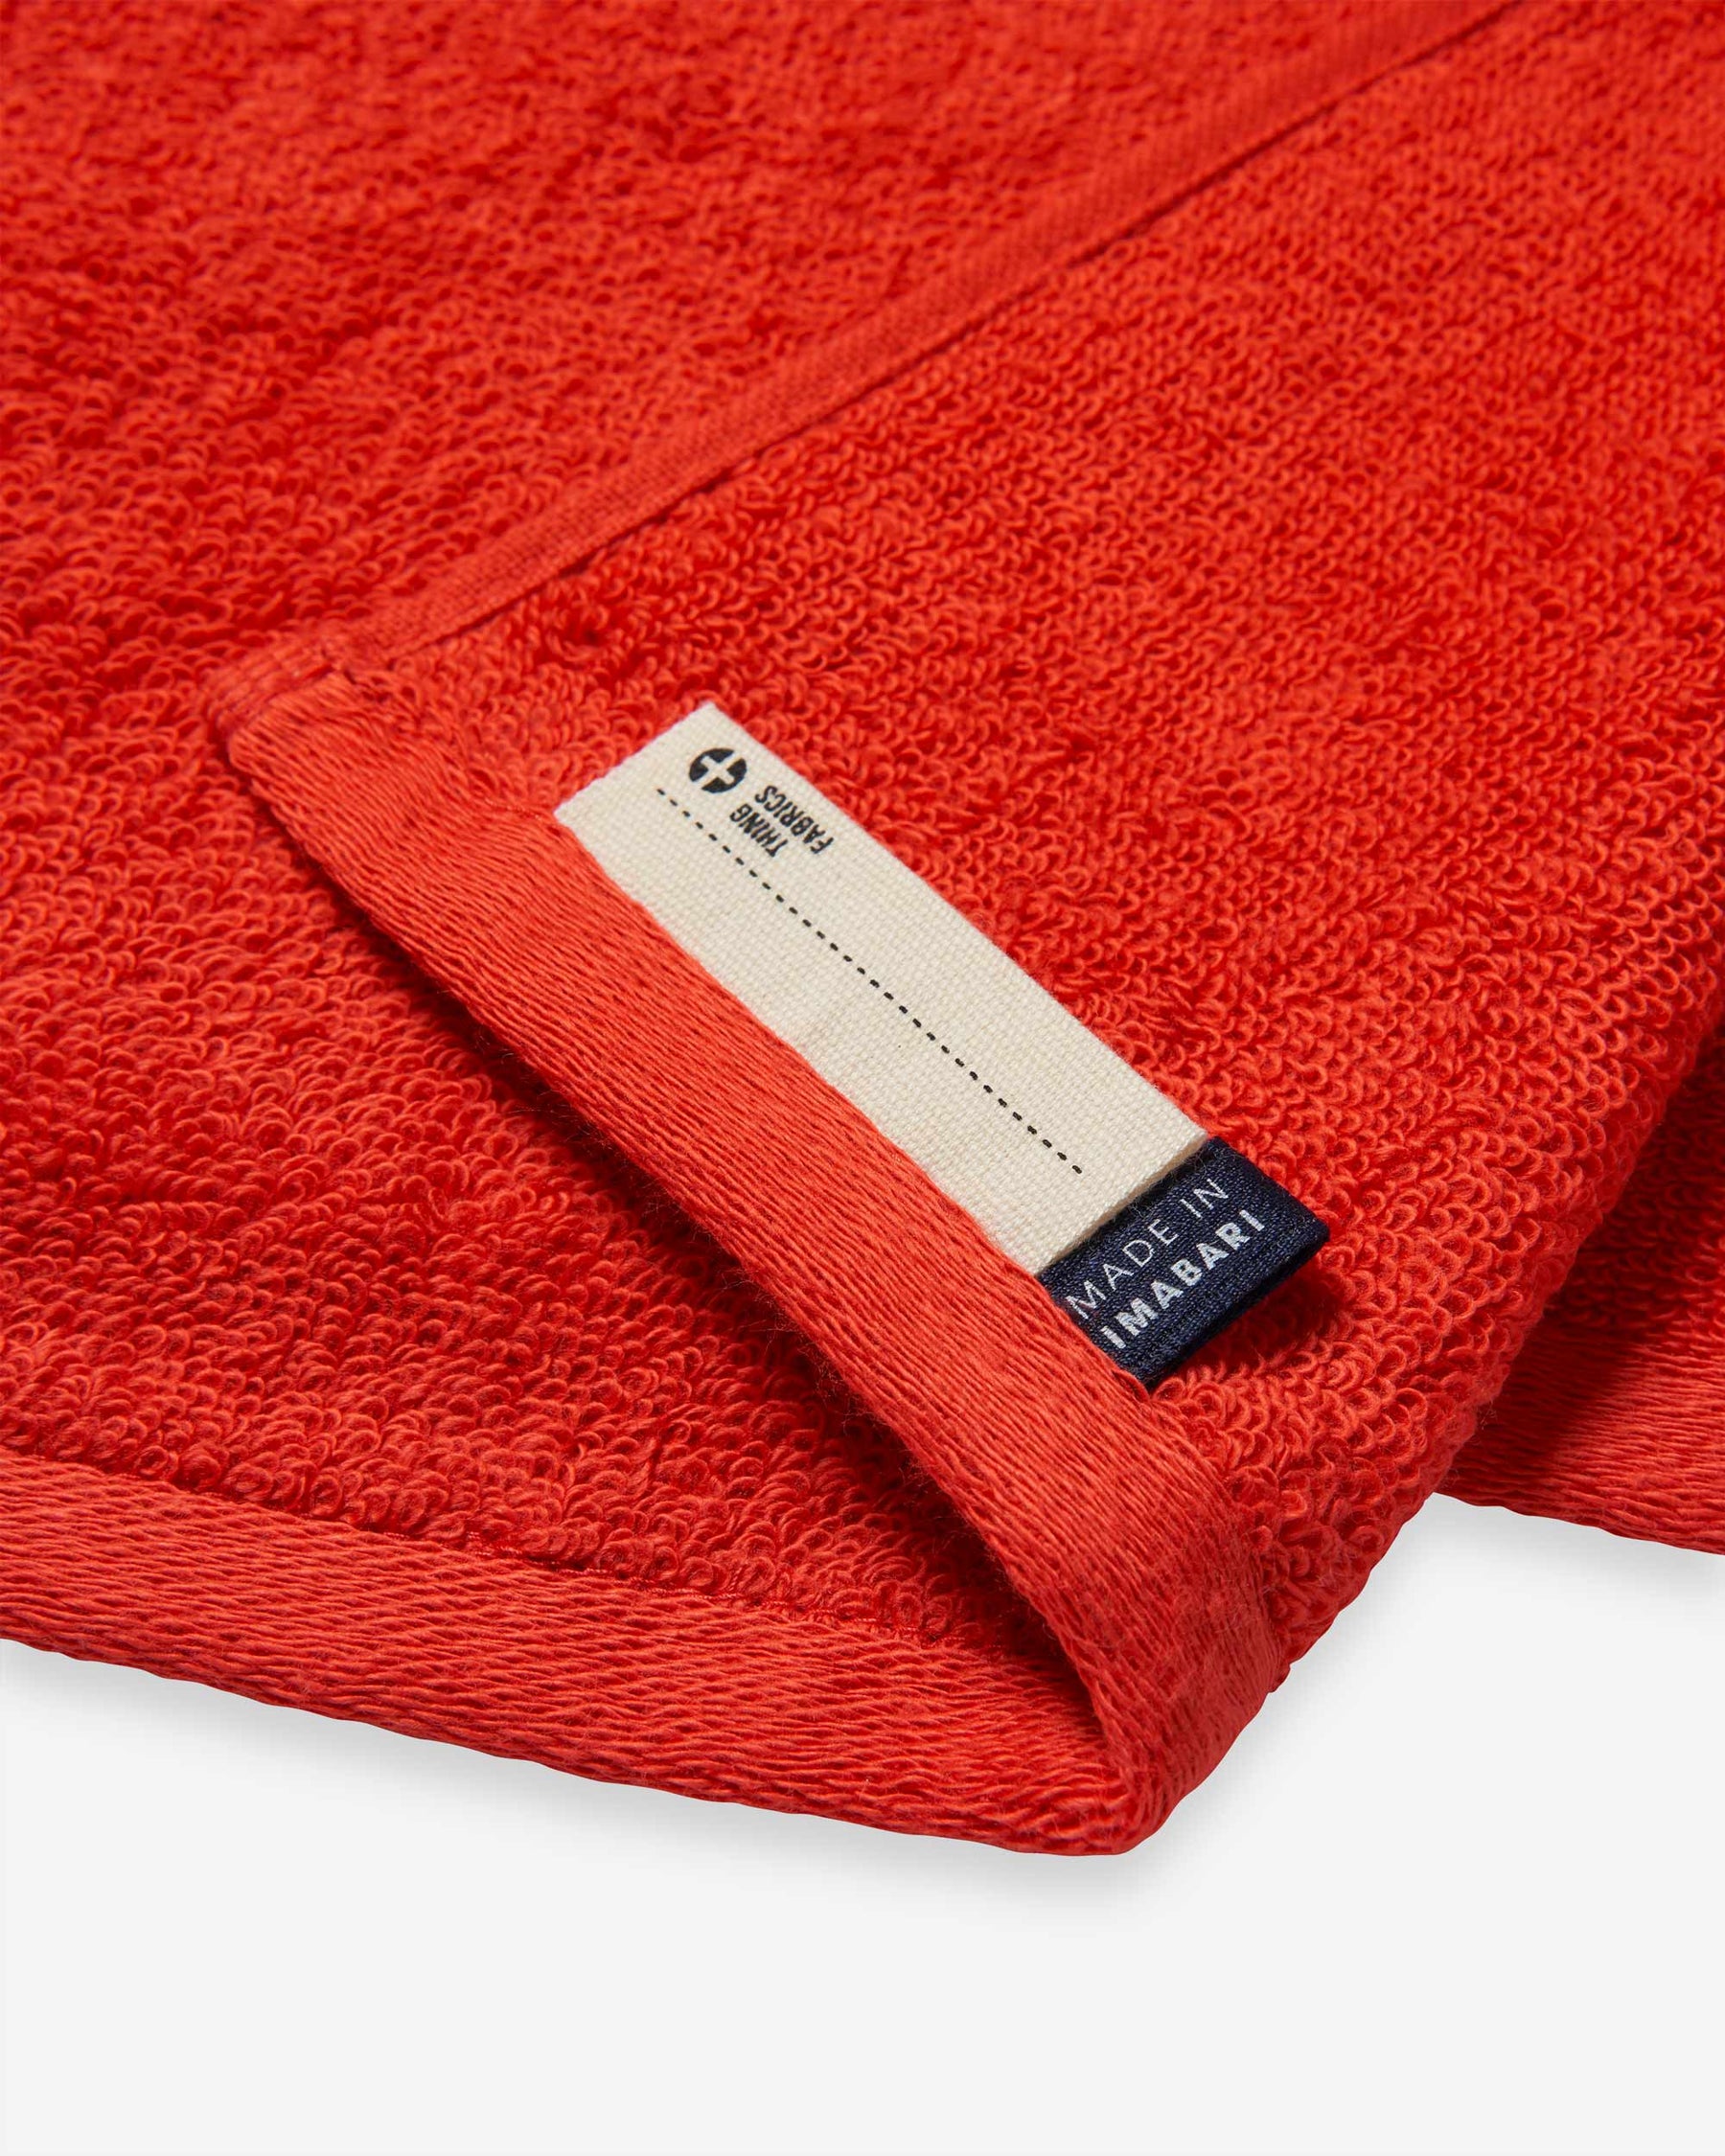 TIP TOP 365 Towel Gift Box - Red